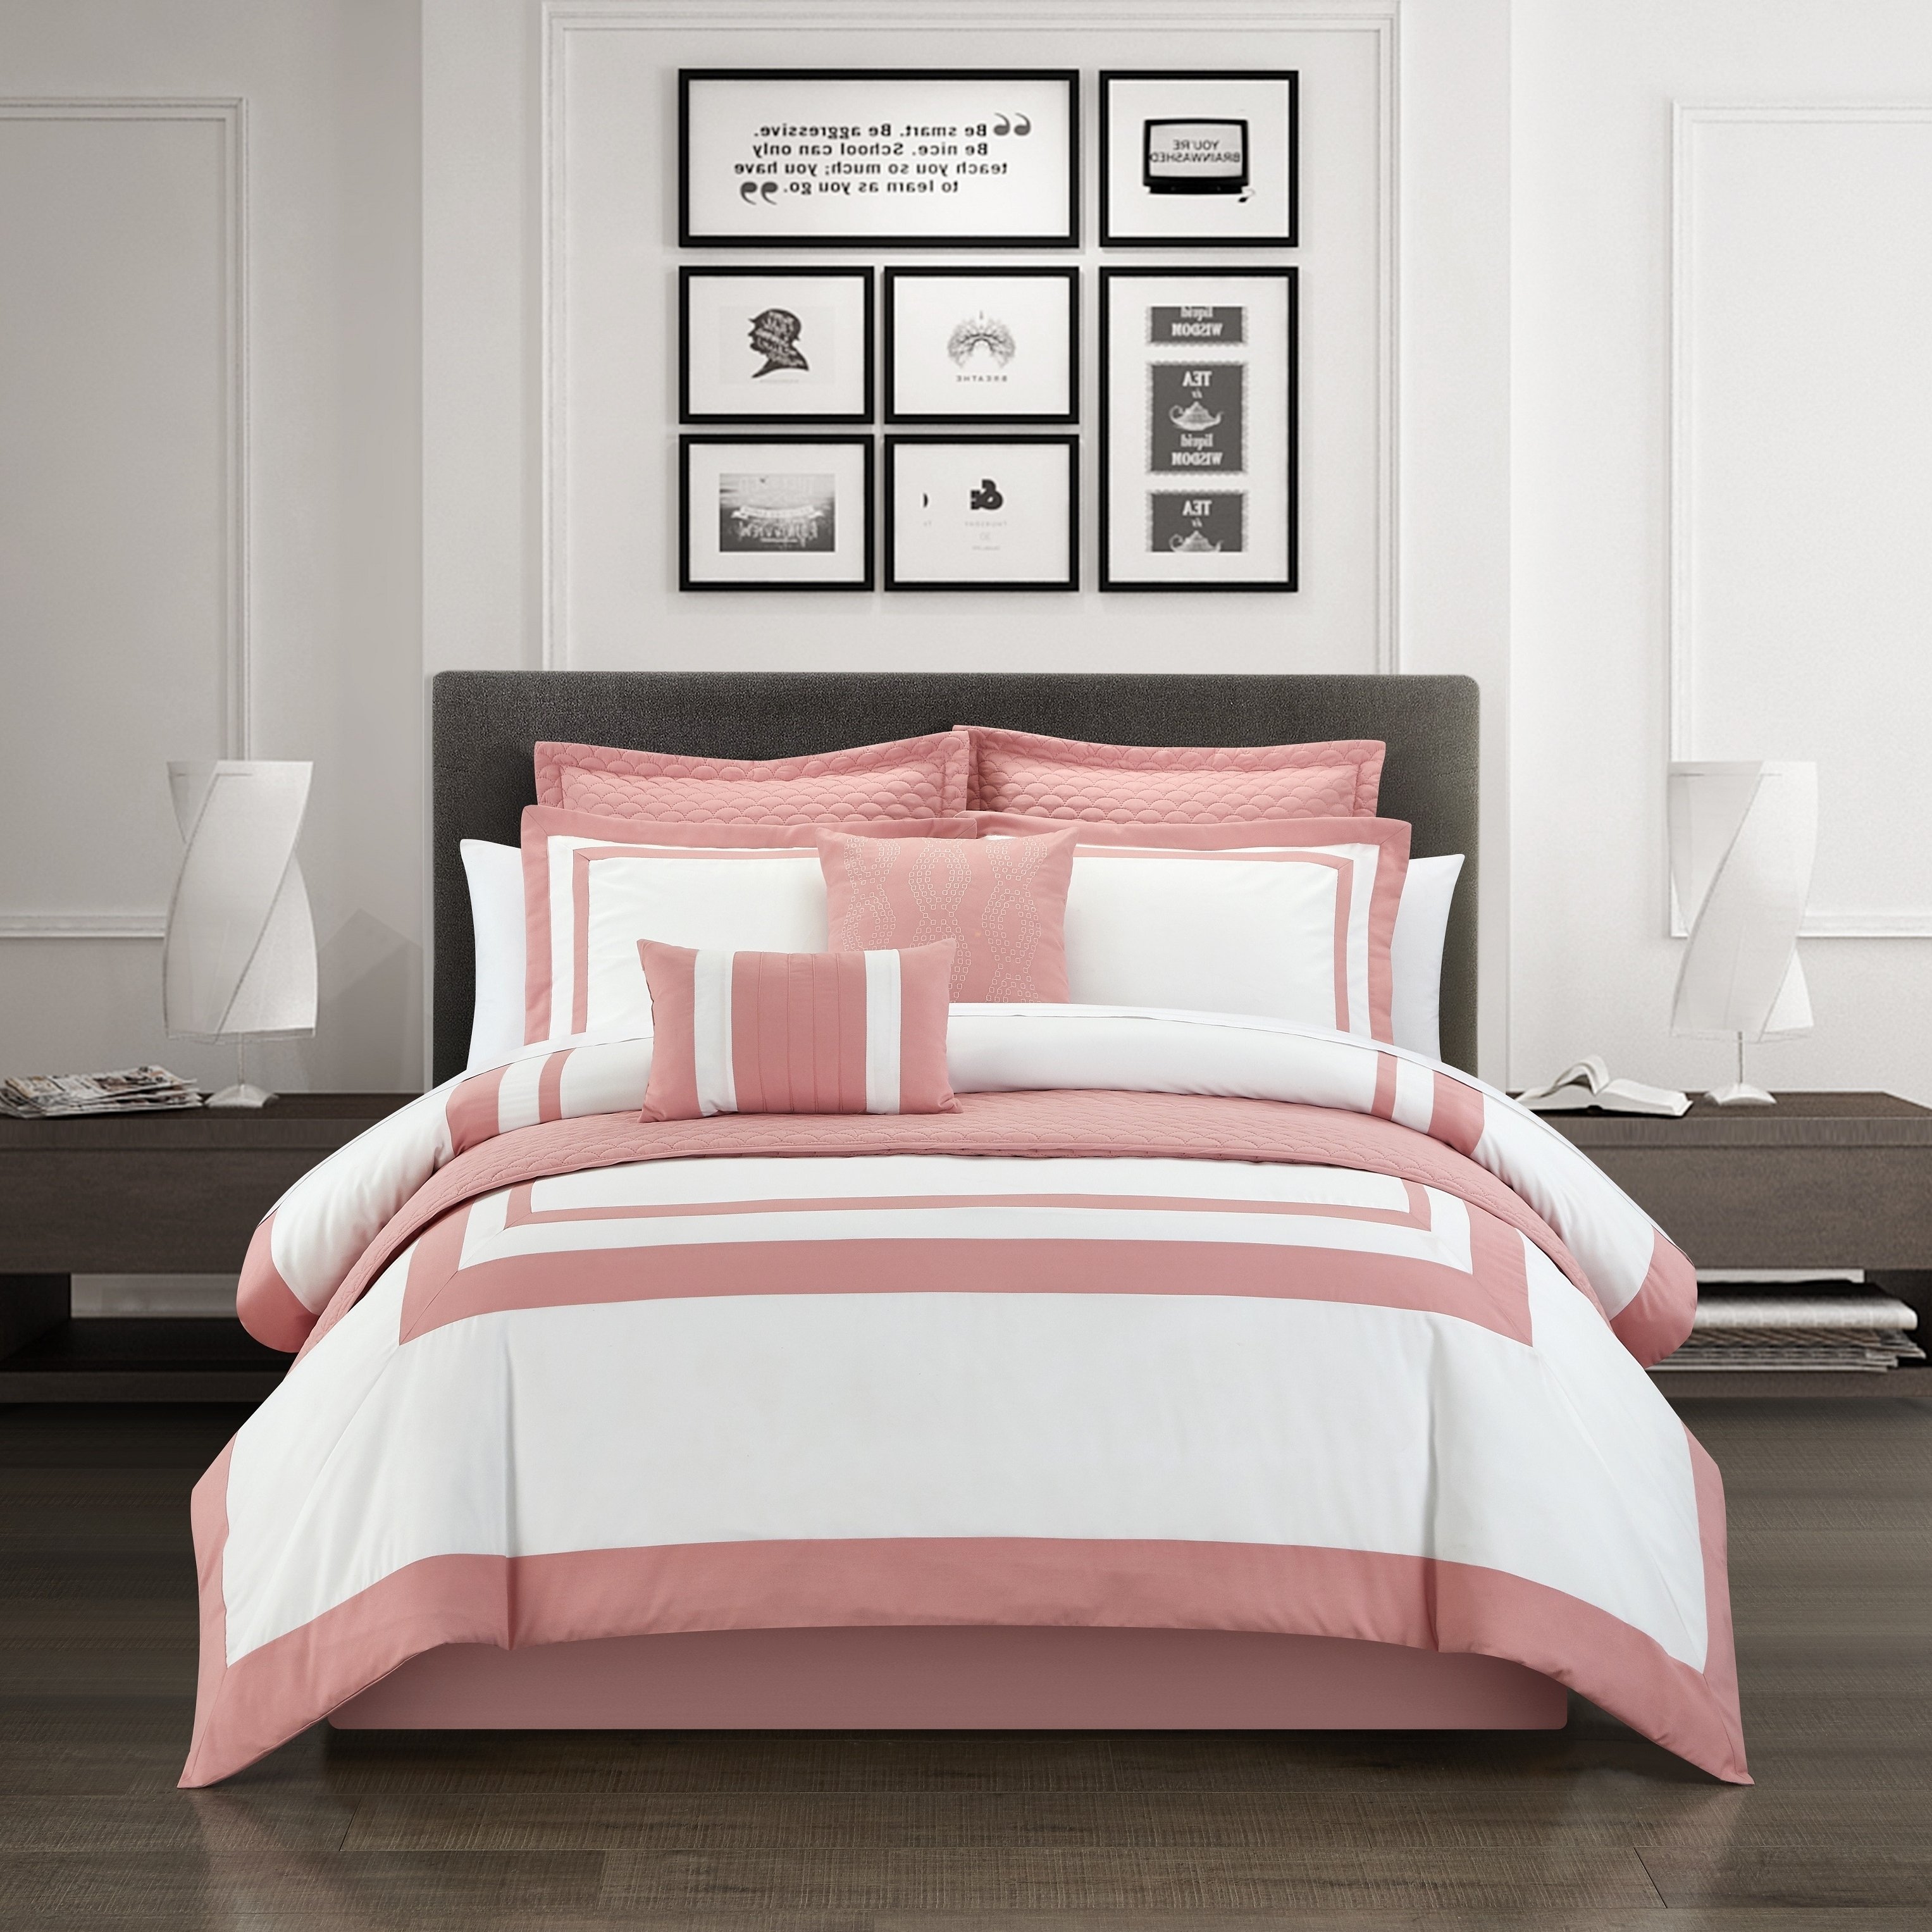 Hortense 8 Or 6 Piece Comforter And Quilt Set Hotel Collection - Rose, King - 8 Piece